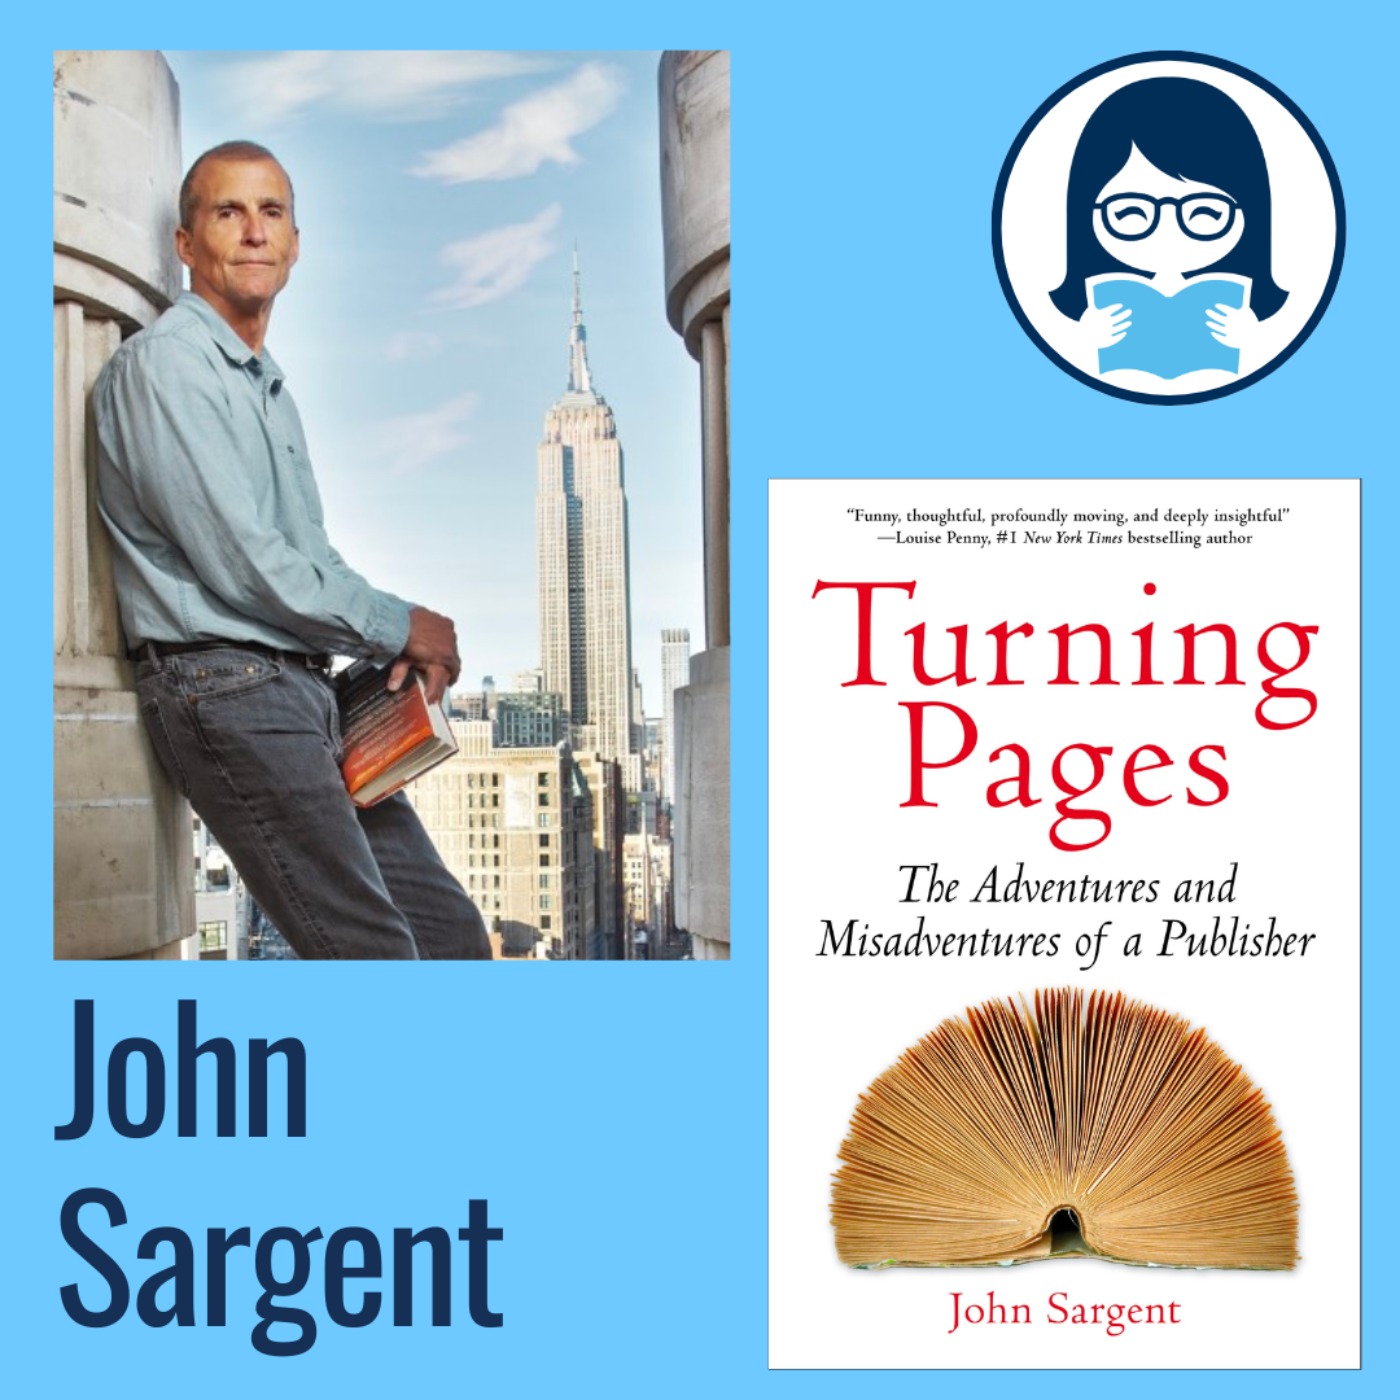 John Sargent, TURNING PAGES: The Adventures and Misadventures of a Publisher